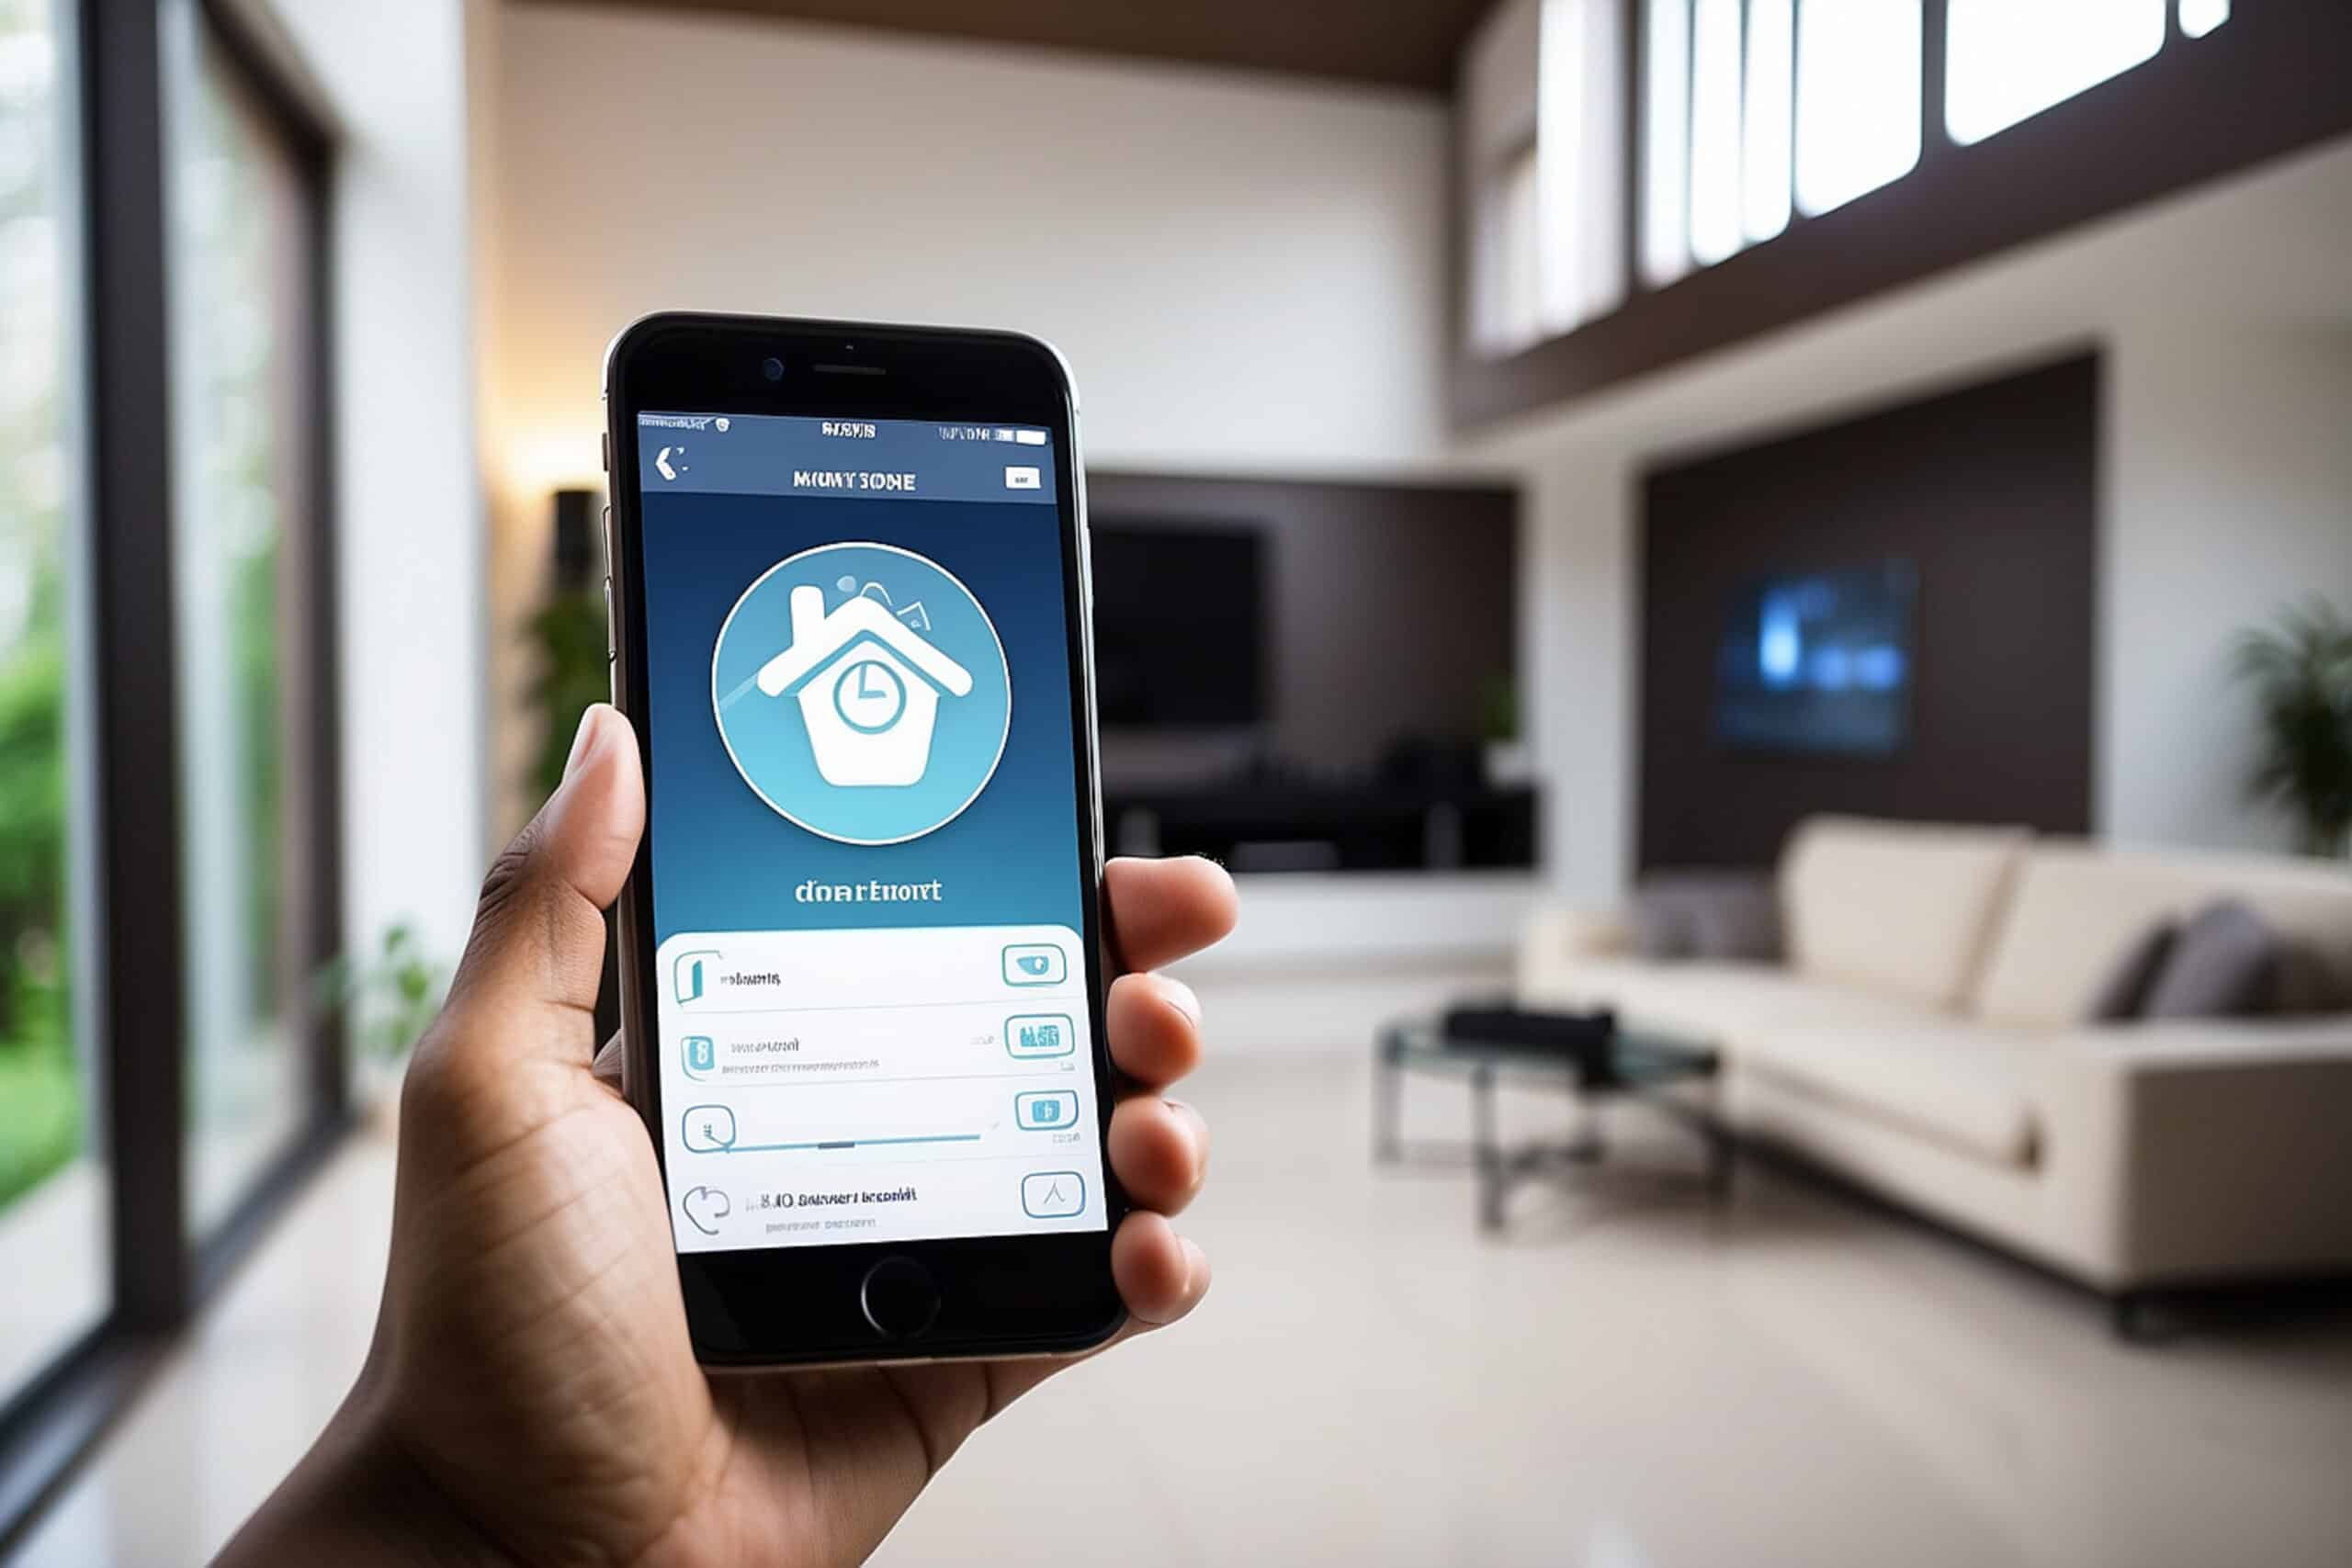 www.appr.com : Can A Cell Phone Replace A Smart Home Hub?